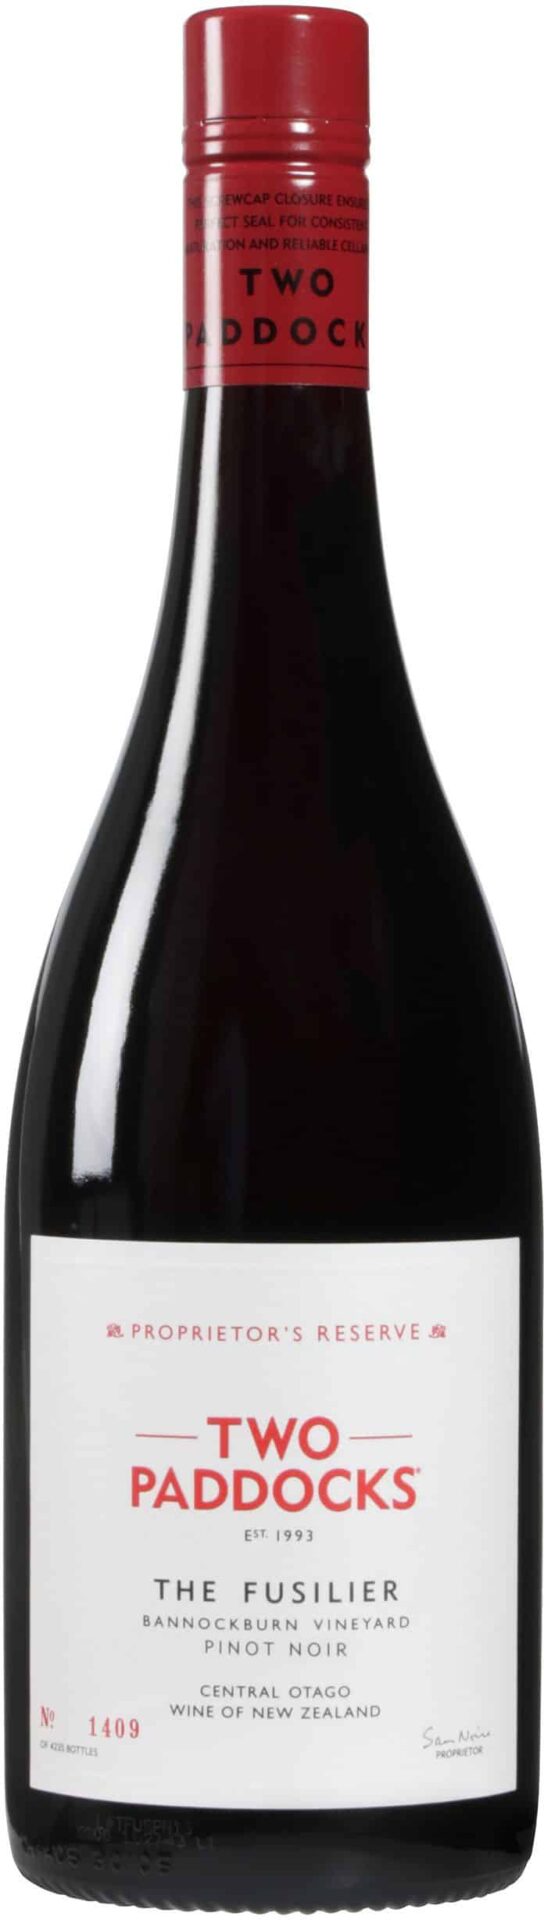 TWO PADDOCKS WINES - The Fusilier Pinot Noir 2020 (1x75cl)